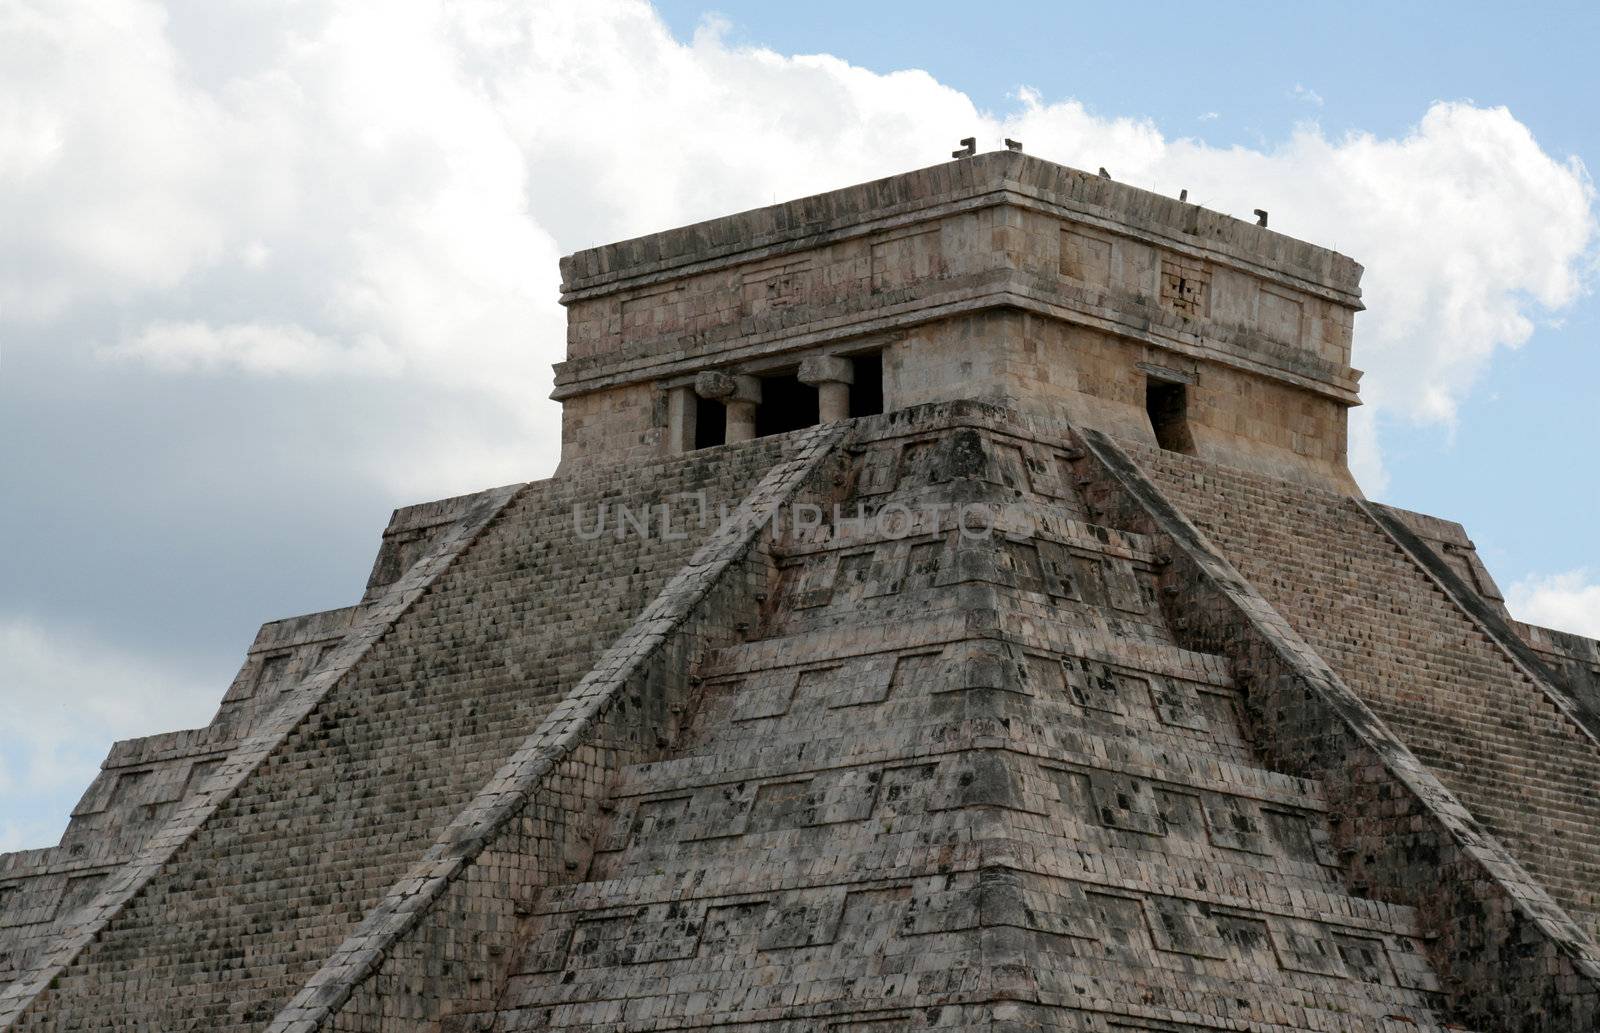 The top of the temple of Kukulkan at Chichen Itza, (Mayan Ruins) in Mexico.
